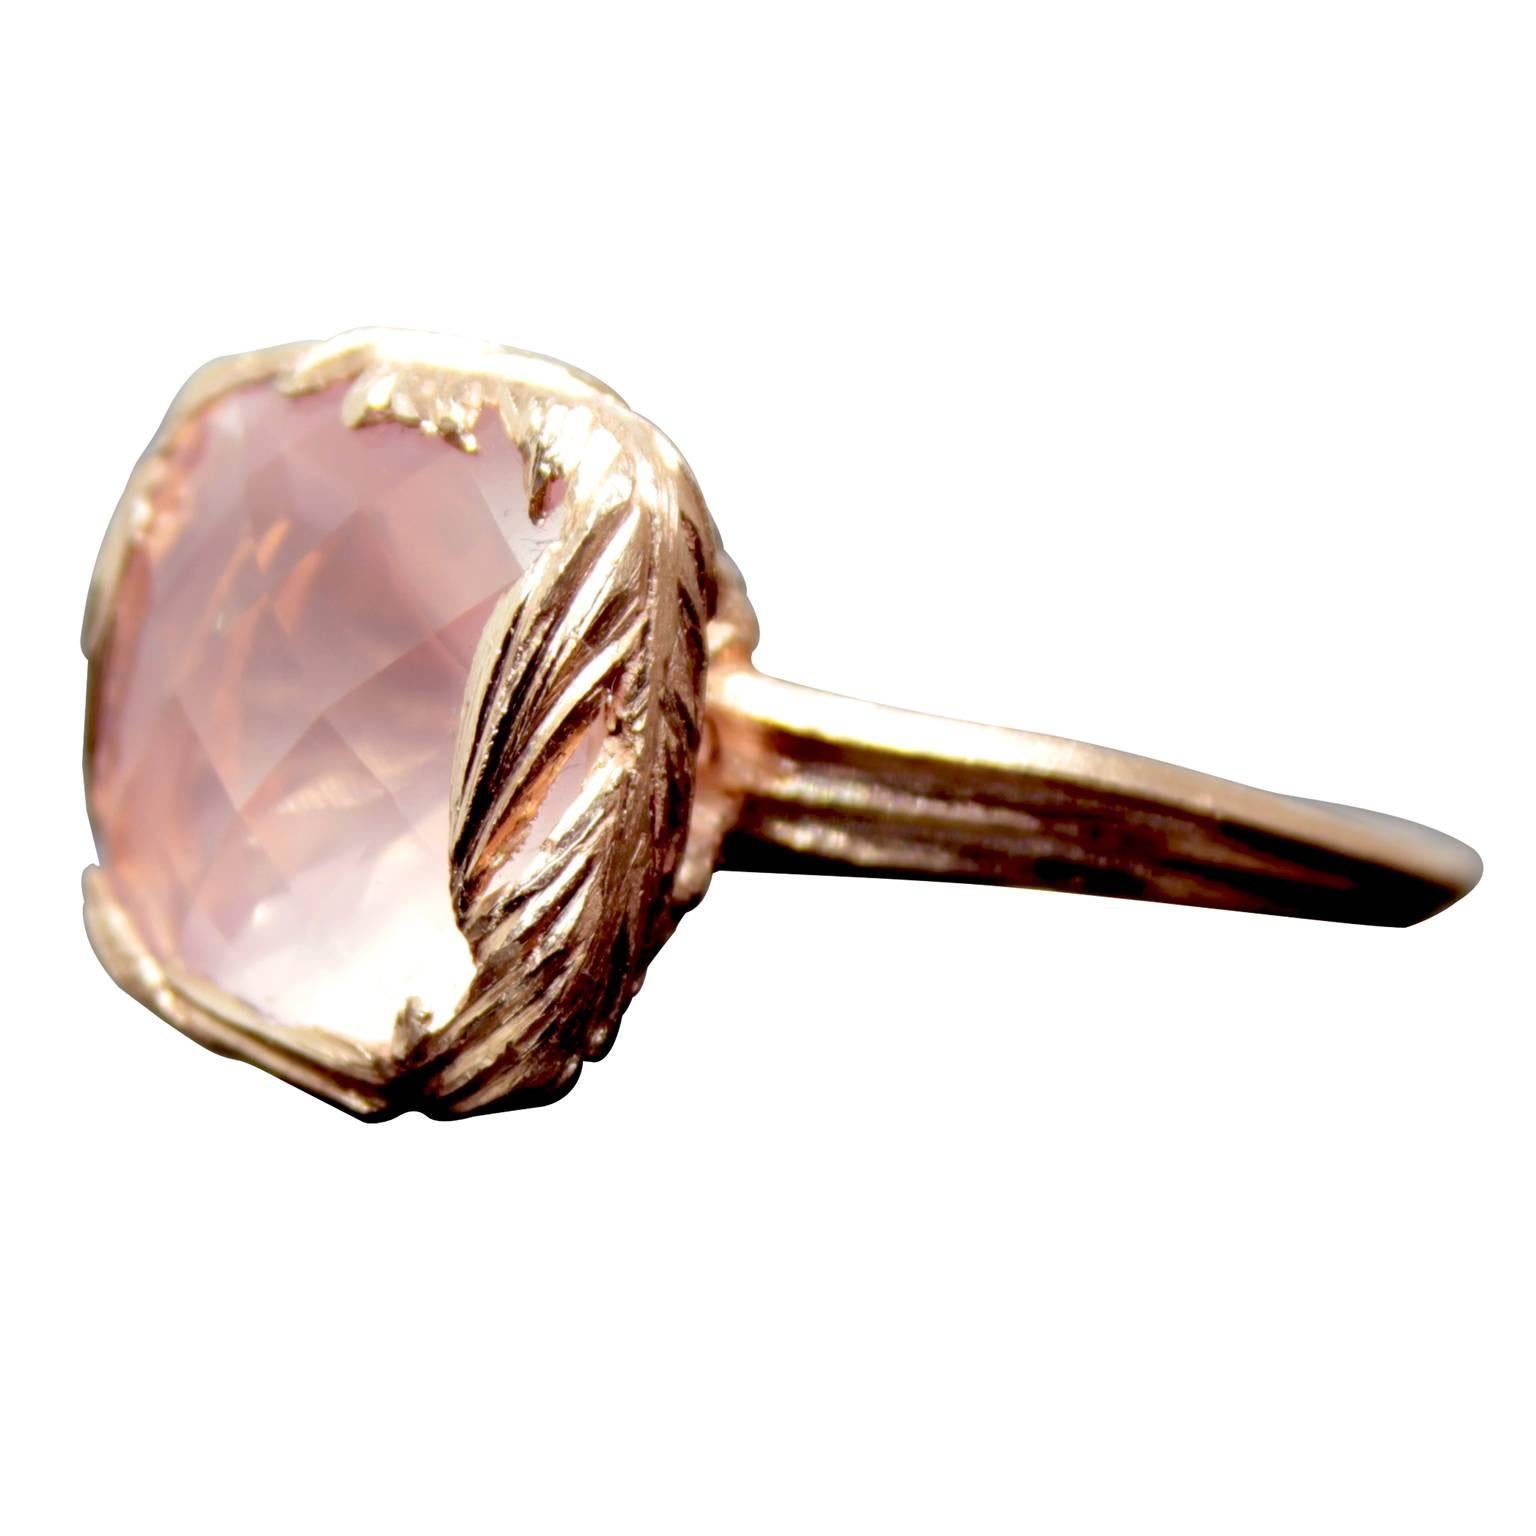 Rose Quartz Cushion Cut stone set with a wrap of hand carved feathers, mounted to a grooved tapered ring shank. William Cheshire wanted to create a large but delicately made ring with an organic feel. The gentle feathers create the setting as they